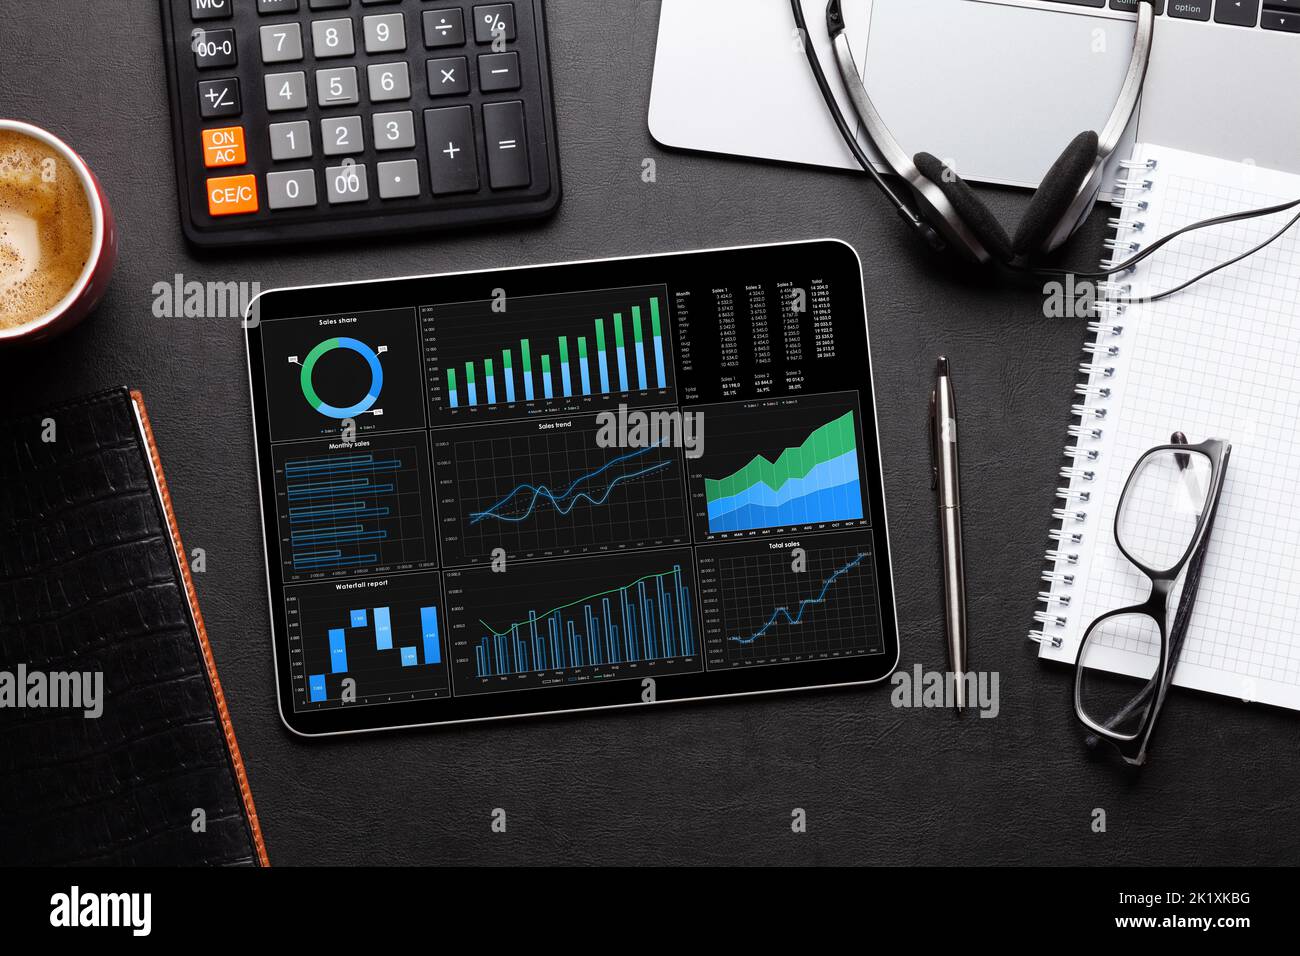 Tablet with business reports and charts, coffee cup and office supplies on desk. Top view flat lay Stock Photo